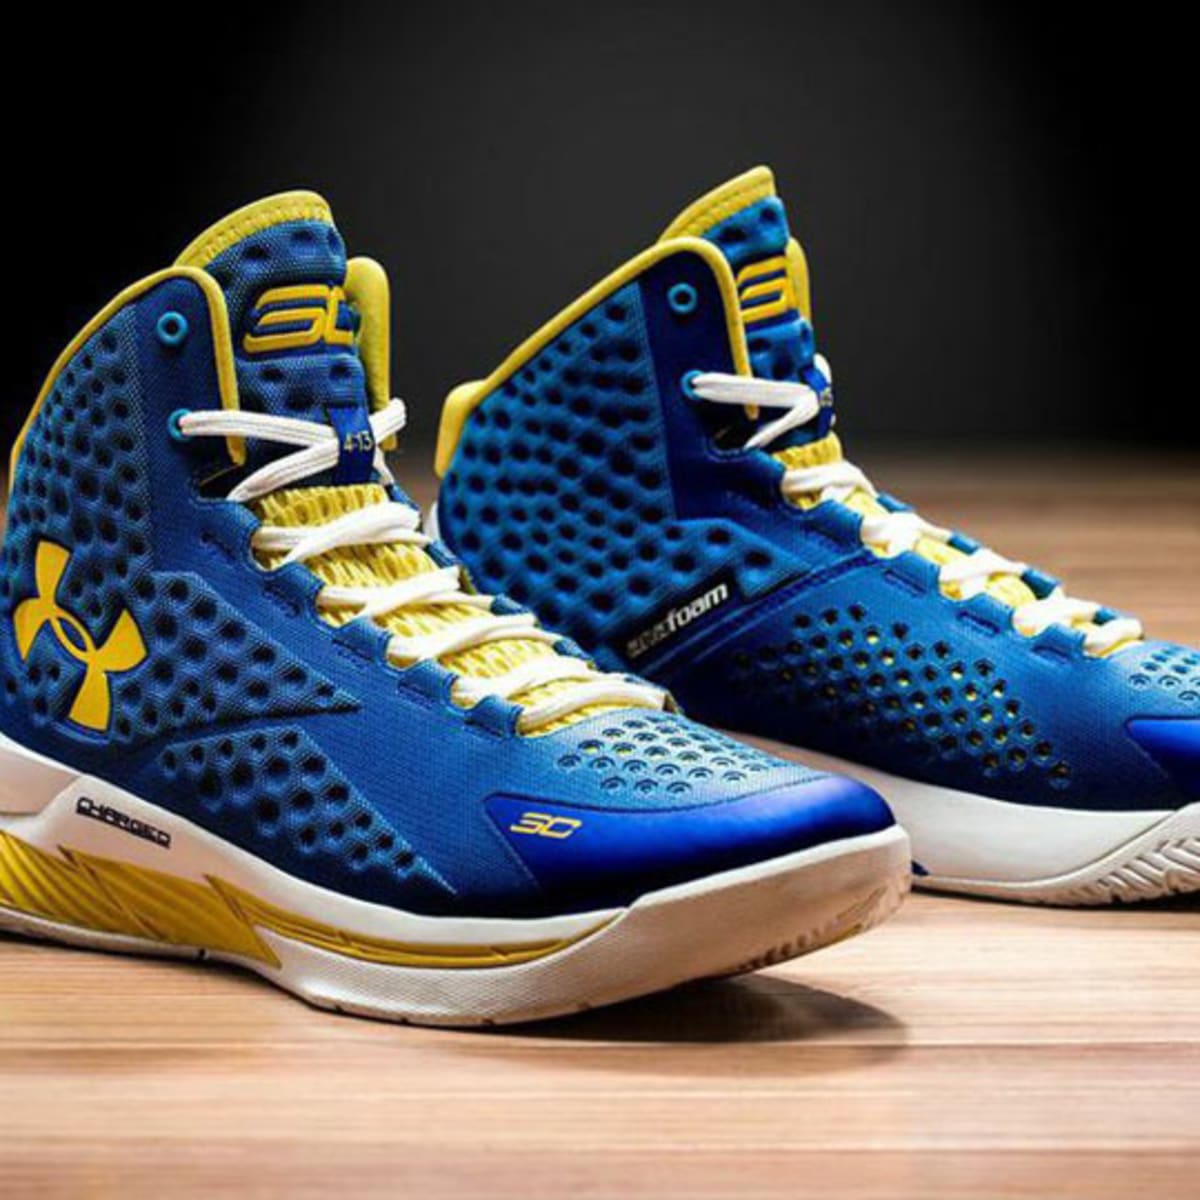 Stephen Curry Under Armour Shoes